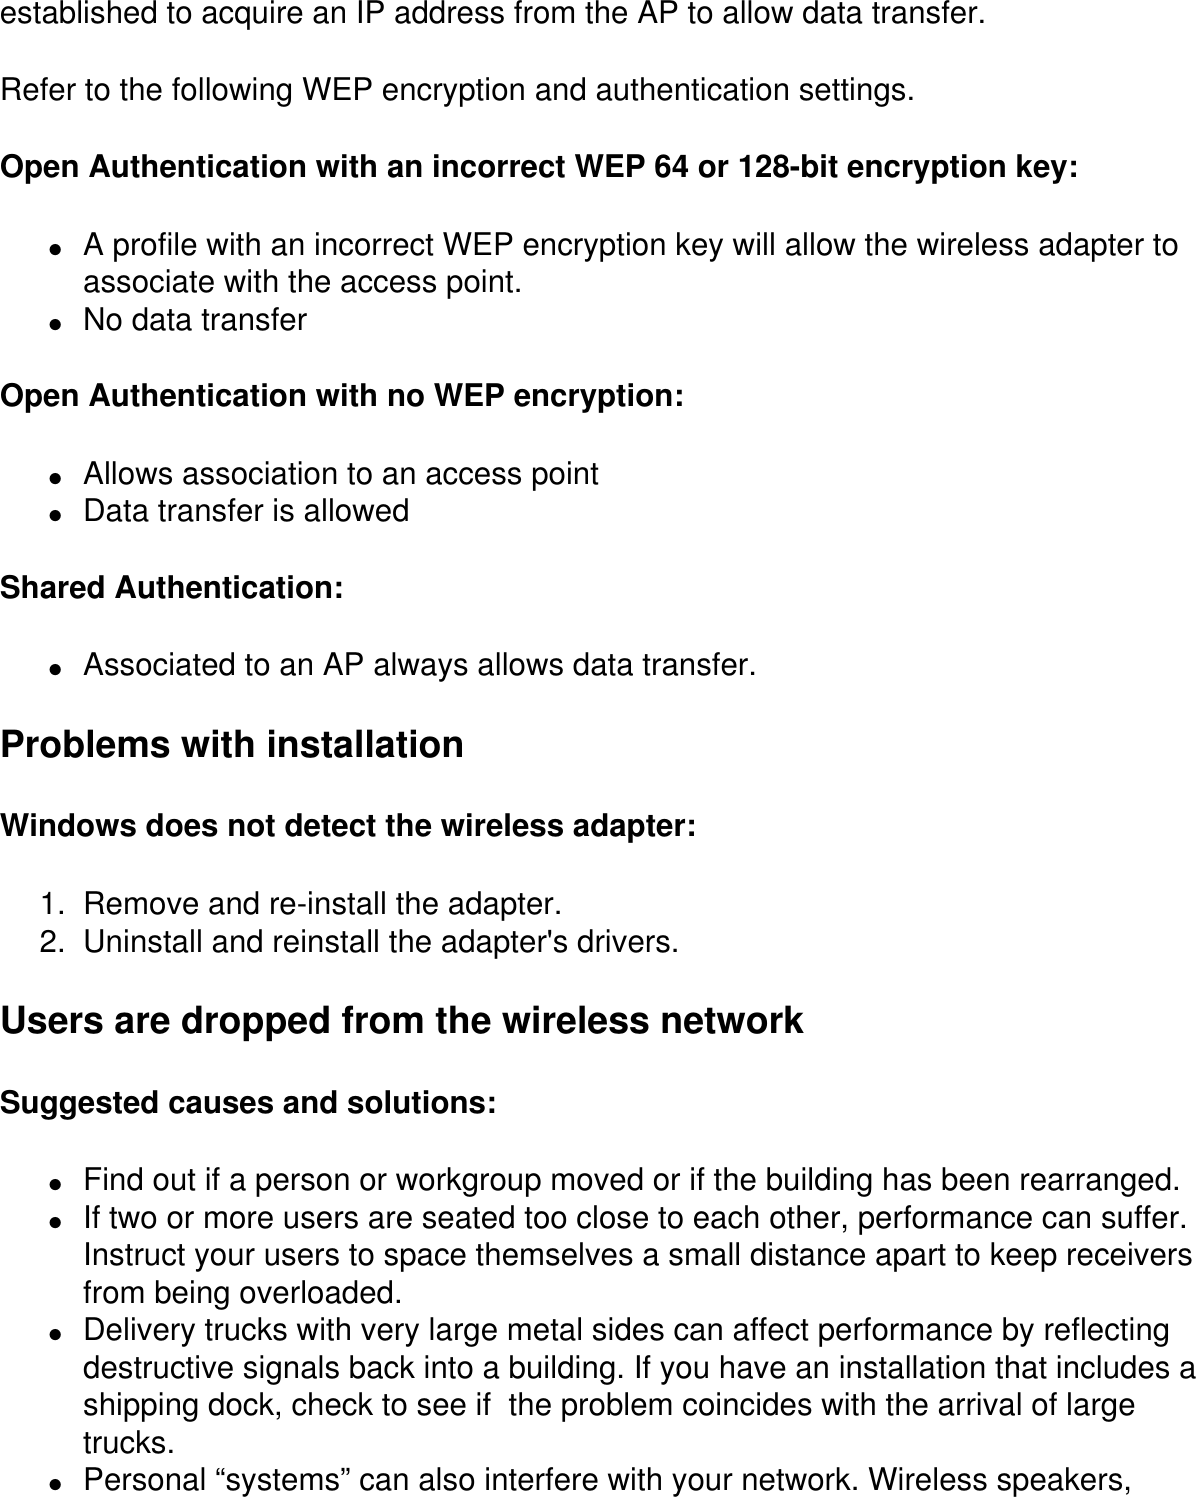 established to acquire an IP address from the AP to allow data transfer.Refer to the following WEP encryption and authentication settings.Open Authentication with an incorrect WEP 64 or 128-bit encryption key:●     A profile with an incorrect WEP encryption key will allow the wireless adapter to associate with the access point.●     No data transferOpen Authentication with no WEP encryption:●     Allows association to an access point●     Data transfer is allowedShared Authentication:●     Associated to an AP always allows data transfer.Problems with installationWindows does not detect the wireless adapter:1.  Remove and re-install the adapter.2.  Uninstall and reinstall the adapter&apos;s drivers.Users are dropped from the wireless networkSuggested causes and solutions:●     Find out if a person or workgroup moved or if the building has been rearranged.●     If two or more users are seated too close to each other, performance can suffer. Instruct your users to space themselves a small distance apart to keep receivers from being overloaded.●     Delivery trucks with very large metal sides can affect performance by reflecting destructive signals back into a building. If you have an installation that includes a shipping dock, check to see if  the problem coincides with the arrival of large trucks.●     Personal “systems” can also interfere with your network. Wireless speakers, 